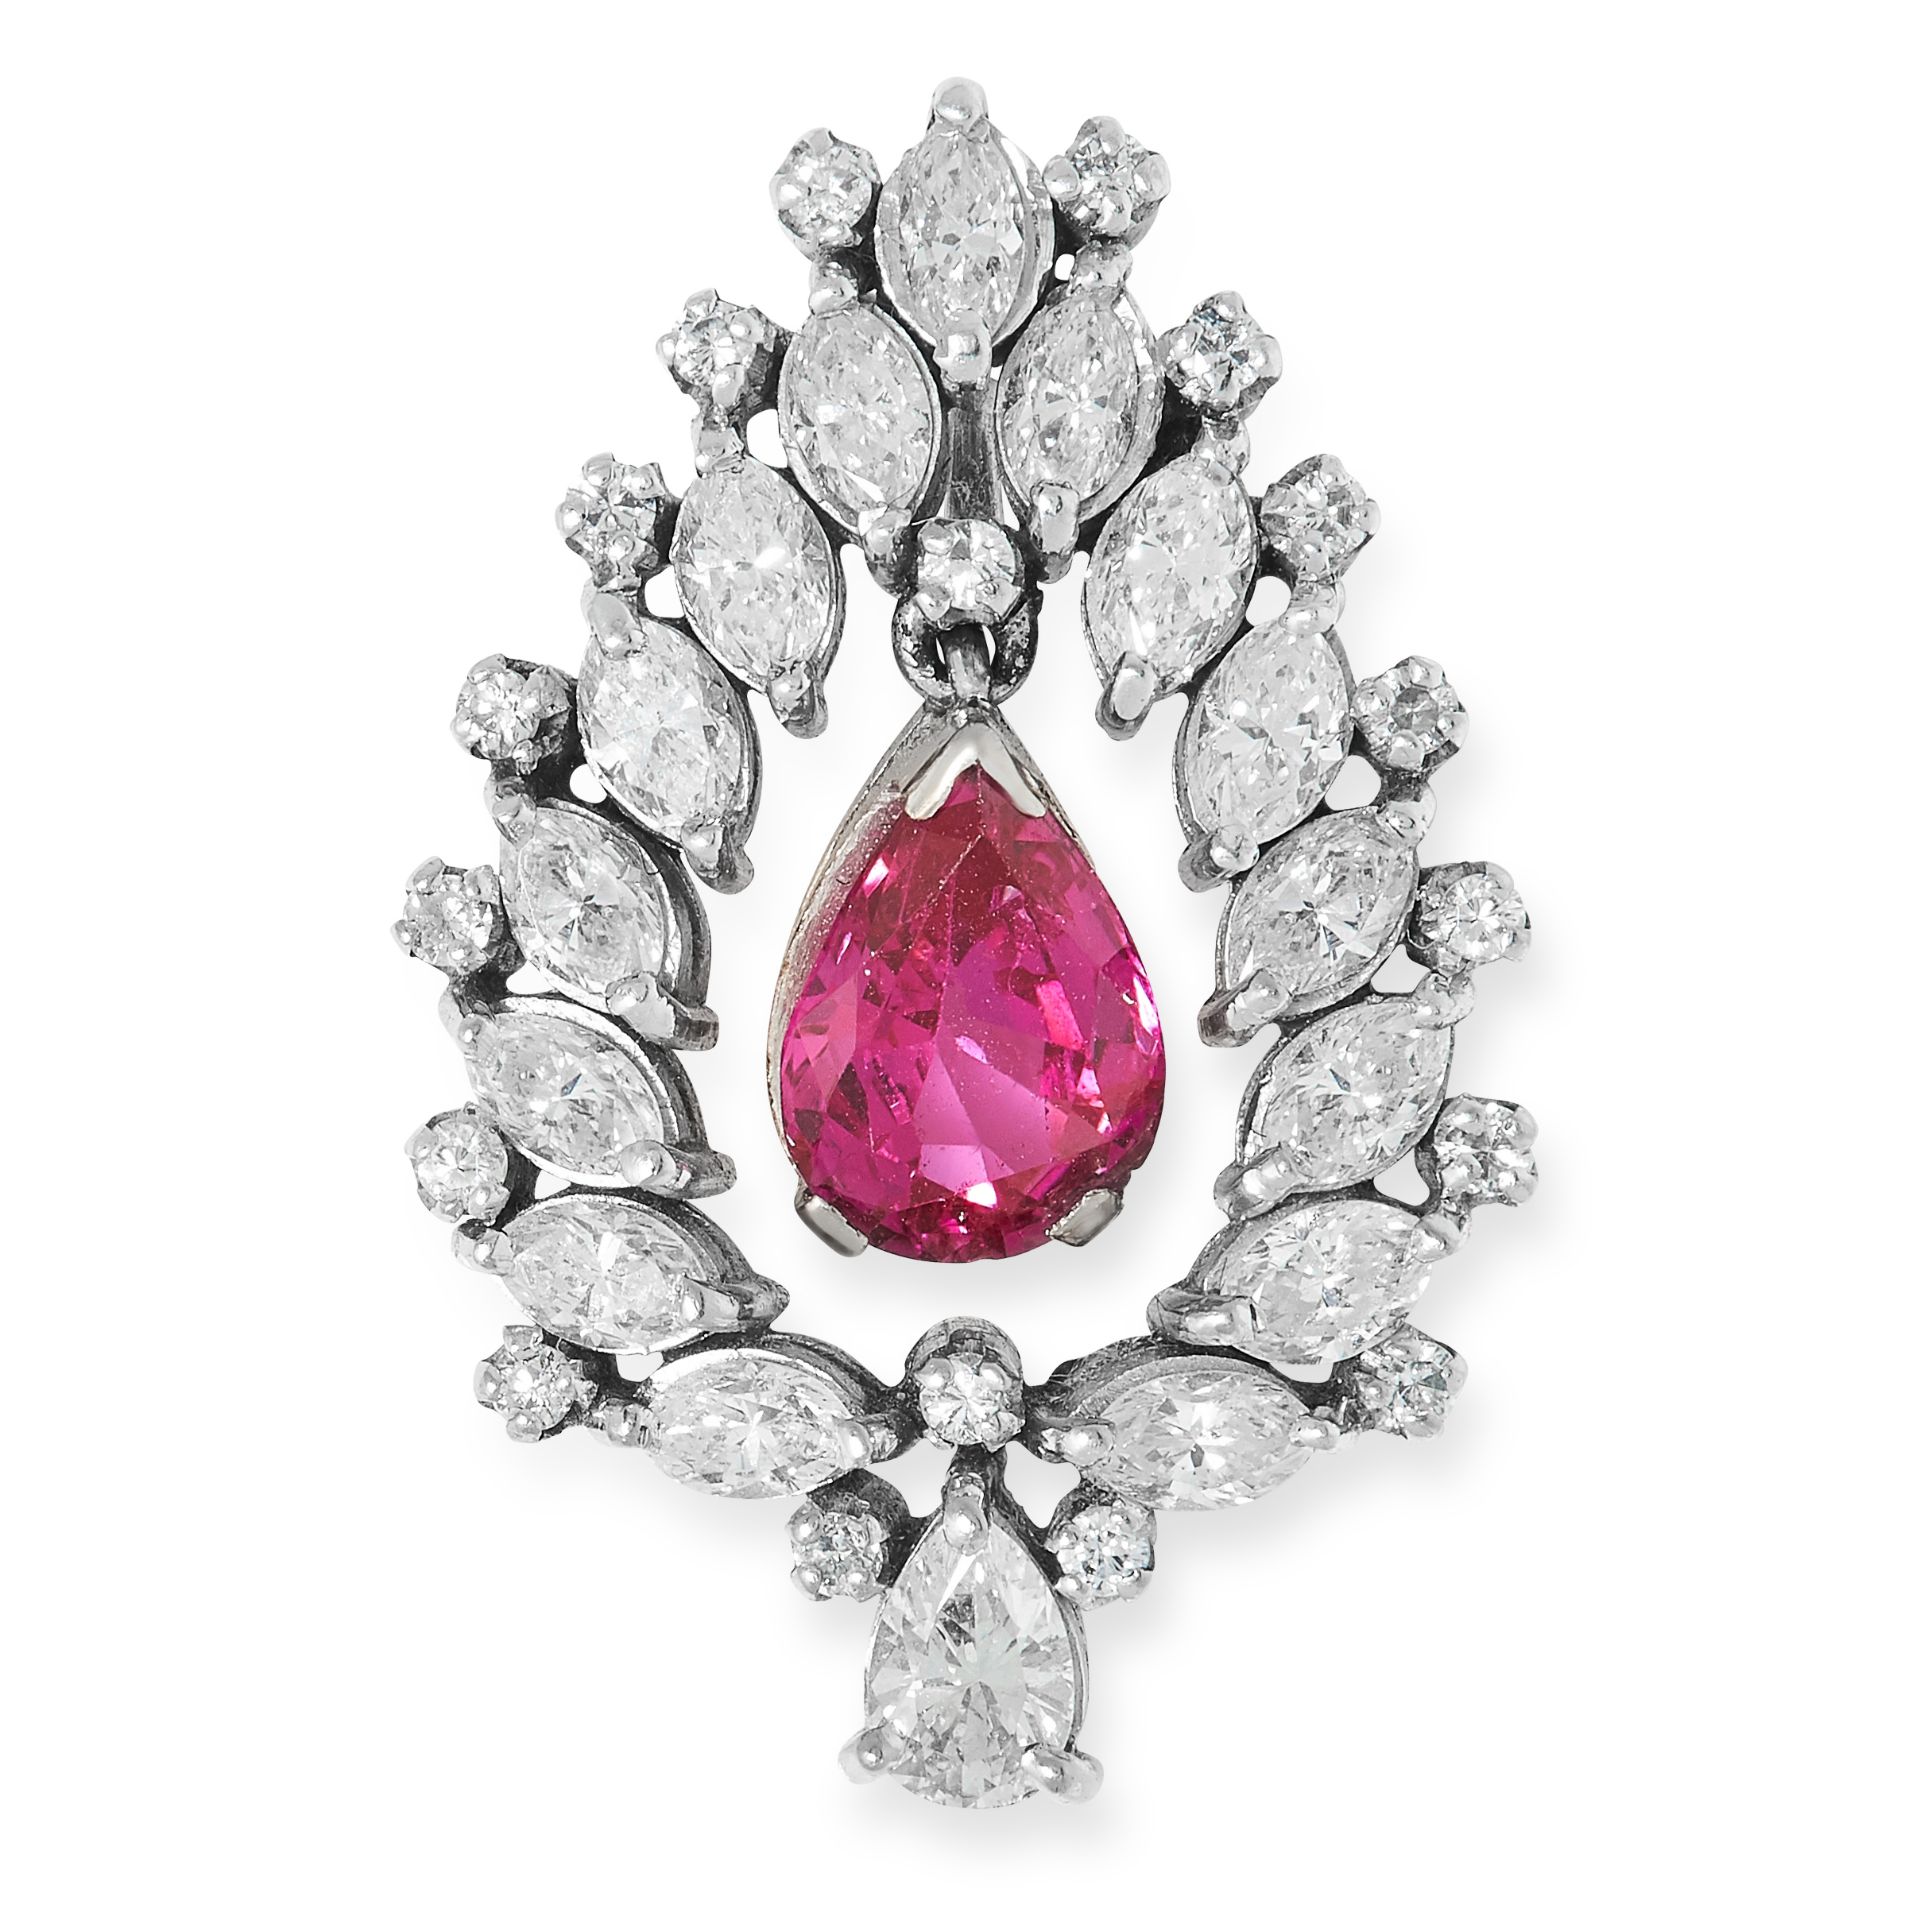 A 1.33 CARAT BURMA NO HEAT RUBY AND DIAMOND PENDANT comprising of a pear cut ruby of 1.33 carats